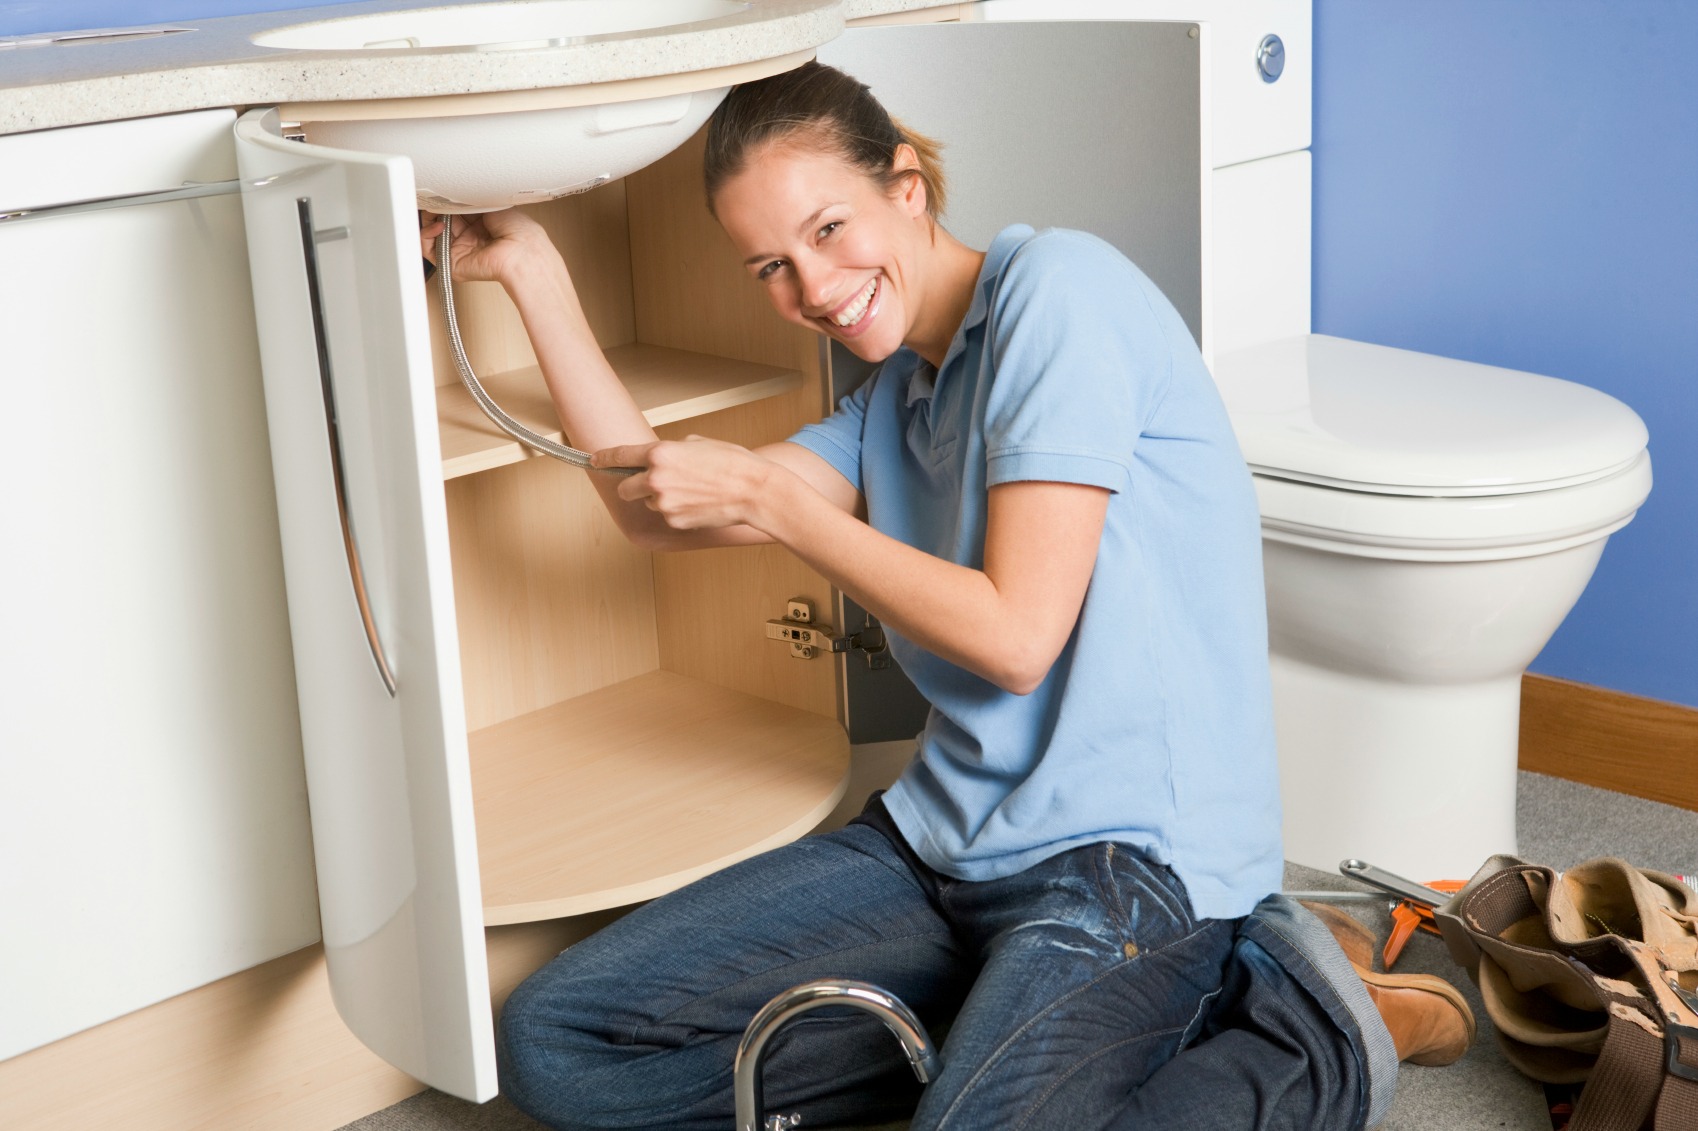 5 Things you need to succeed as a female plumber